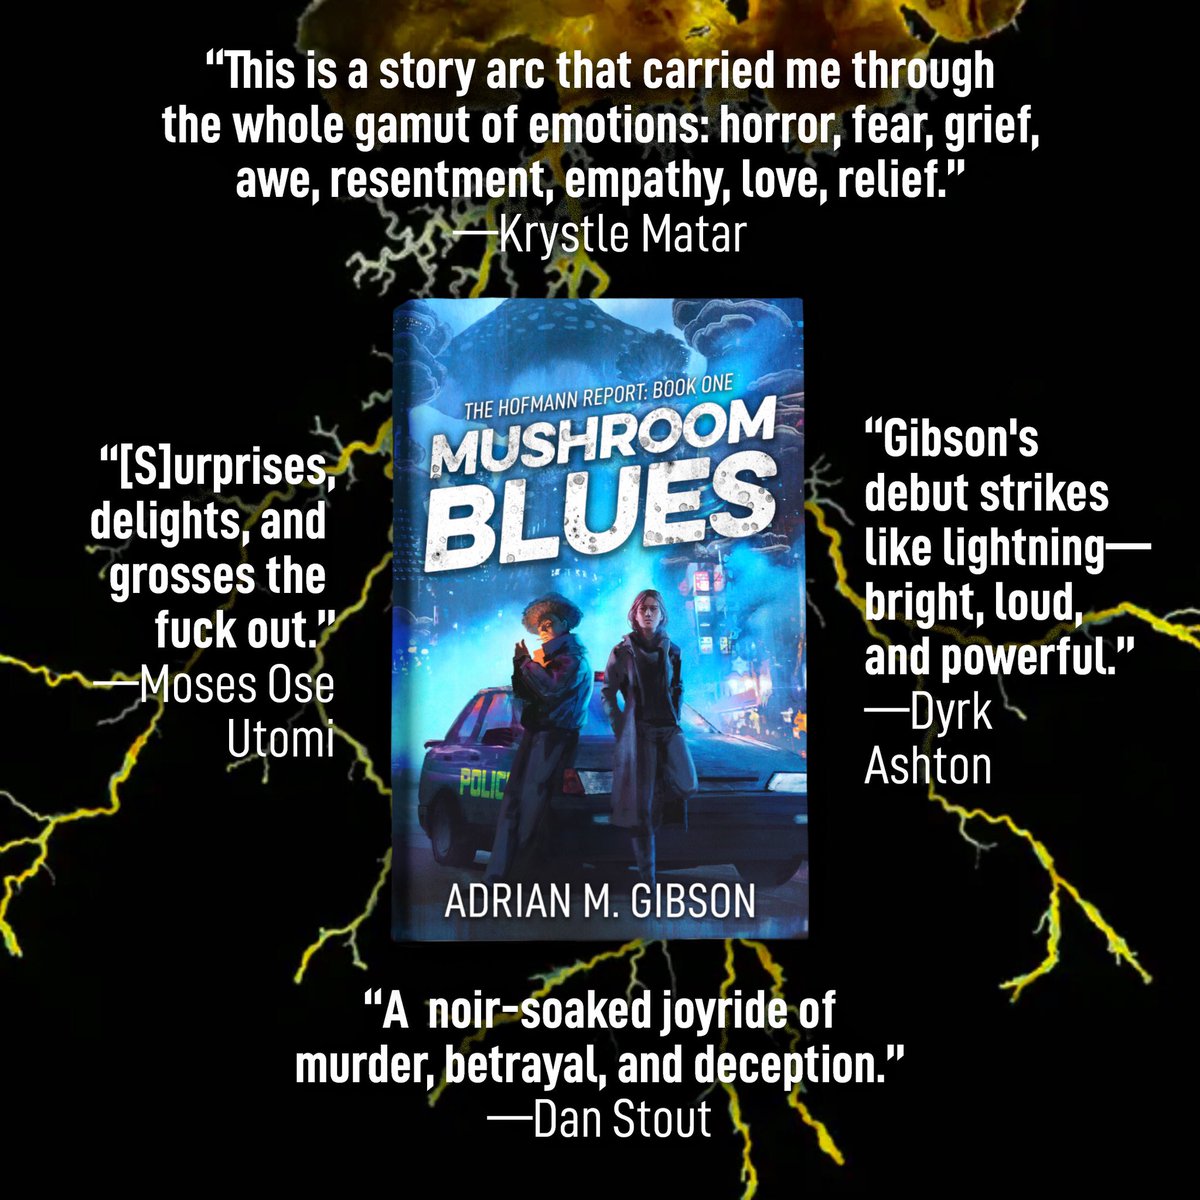 Another incredible quartet of author blurbs for #MushroomBlues, and I couldn’t be more grateful. Thank you @KrystleMatar @UnDyrk @MosesOseUtomi @DanStout 🍄💙 BUY A COPY HERE Paperback: amzn.to/3VoOBNF Hardcover: amzn.to/3vs5nAO eBook/KU: a.co/d/fIKaQ9q